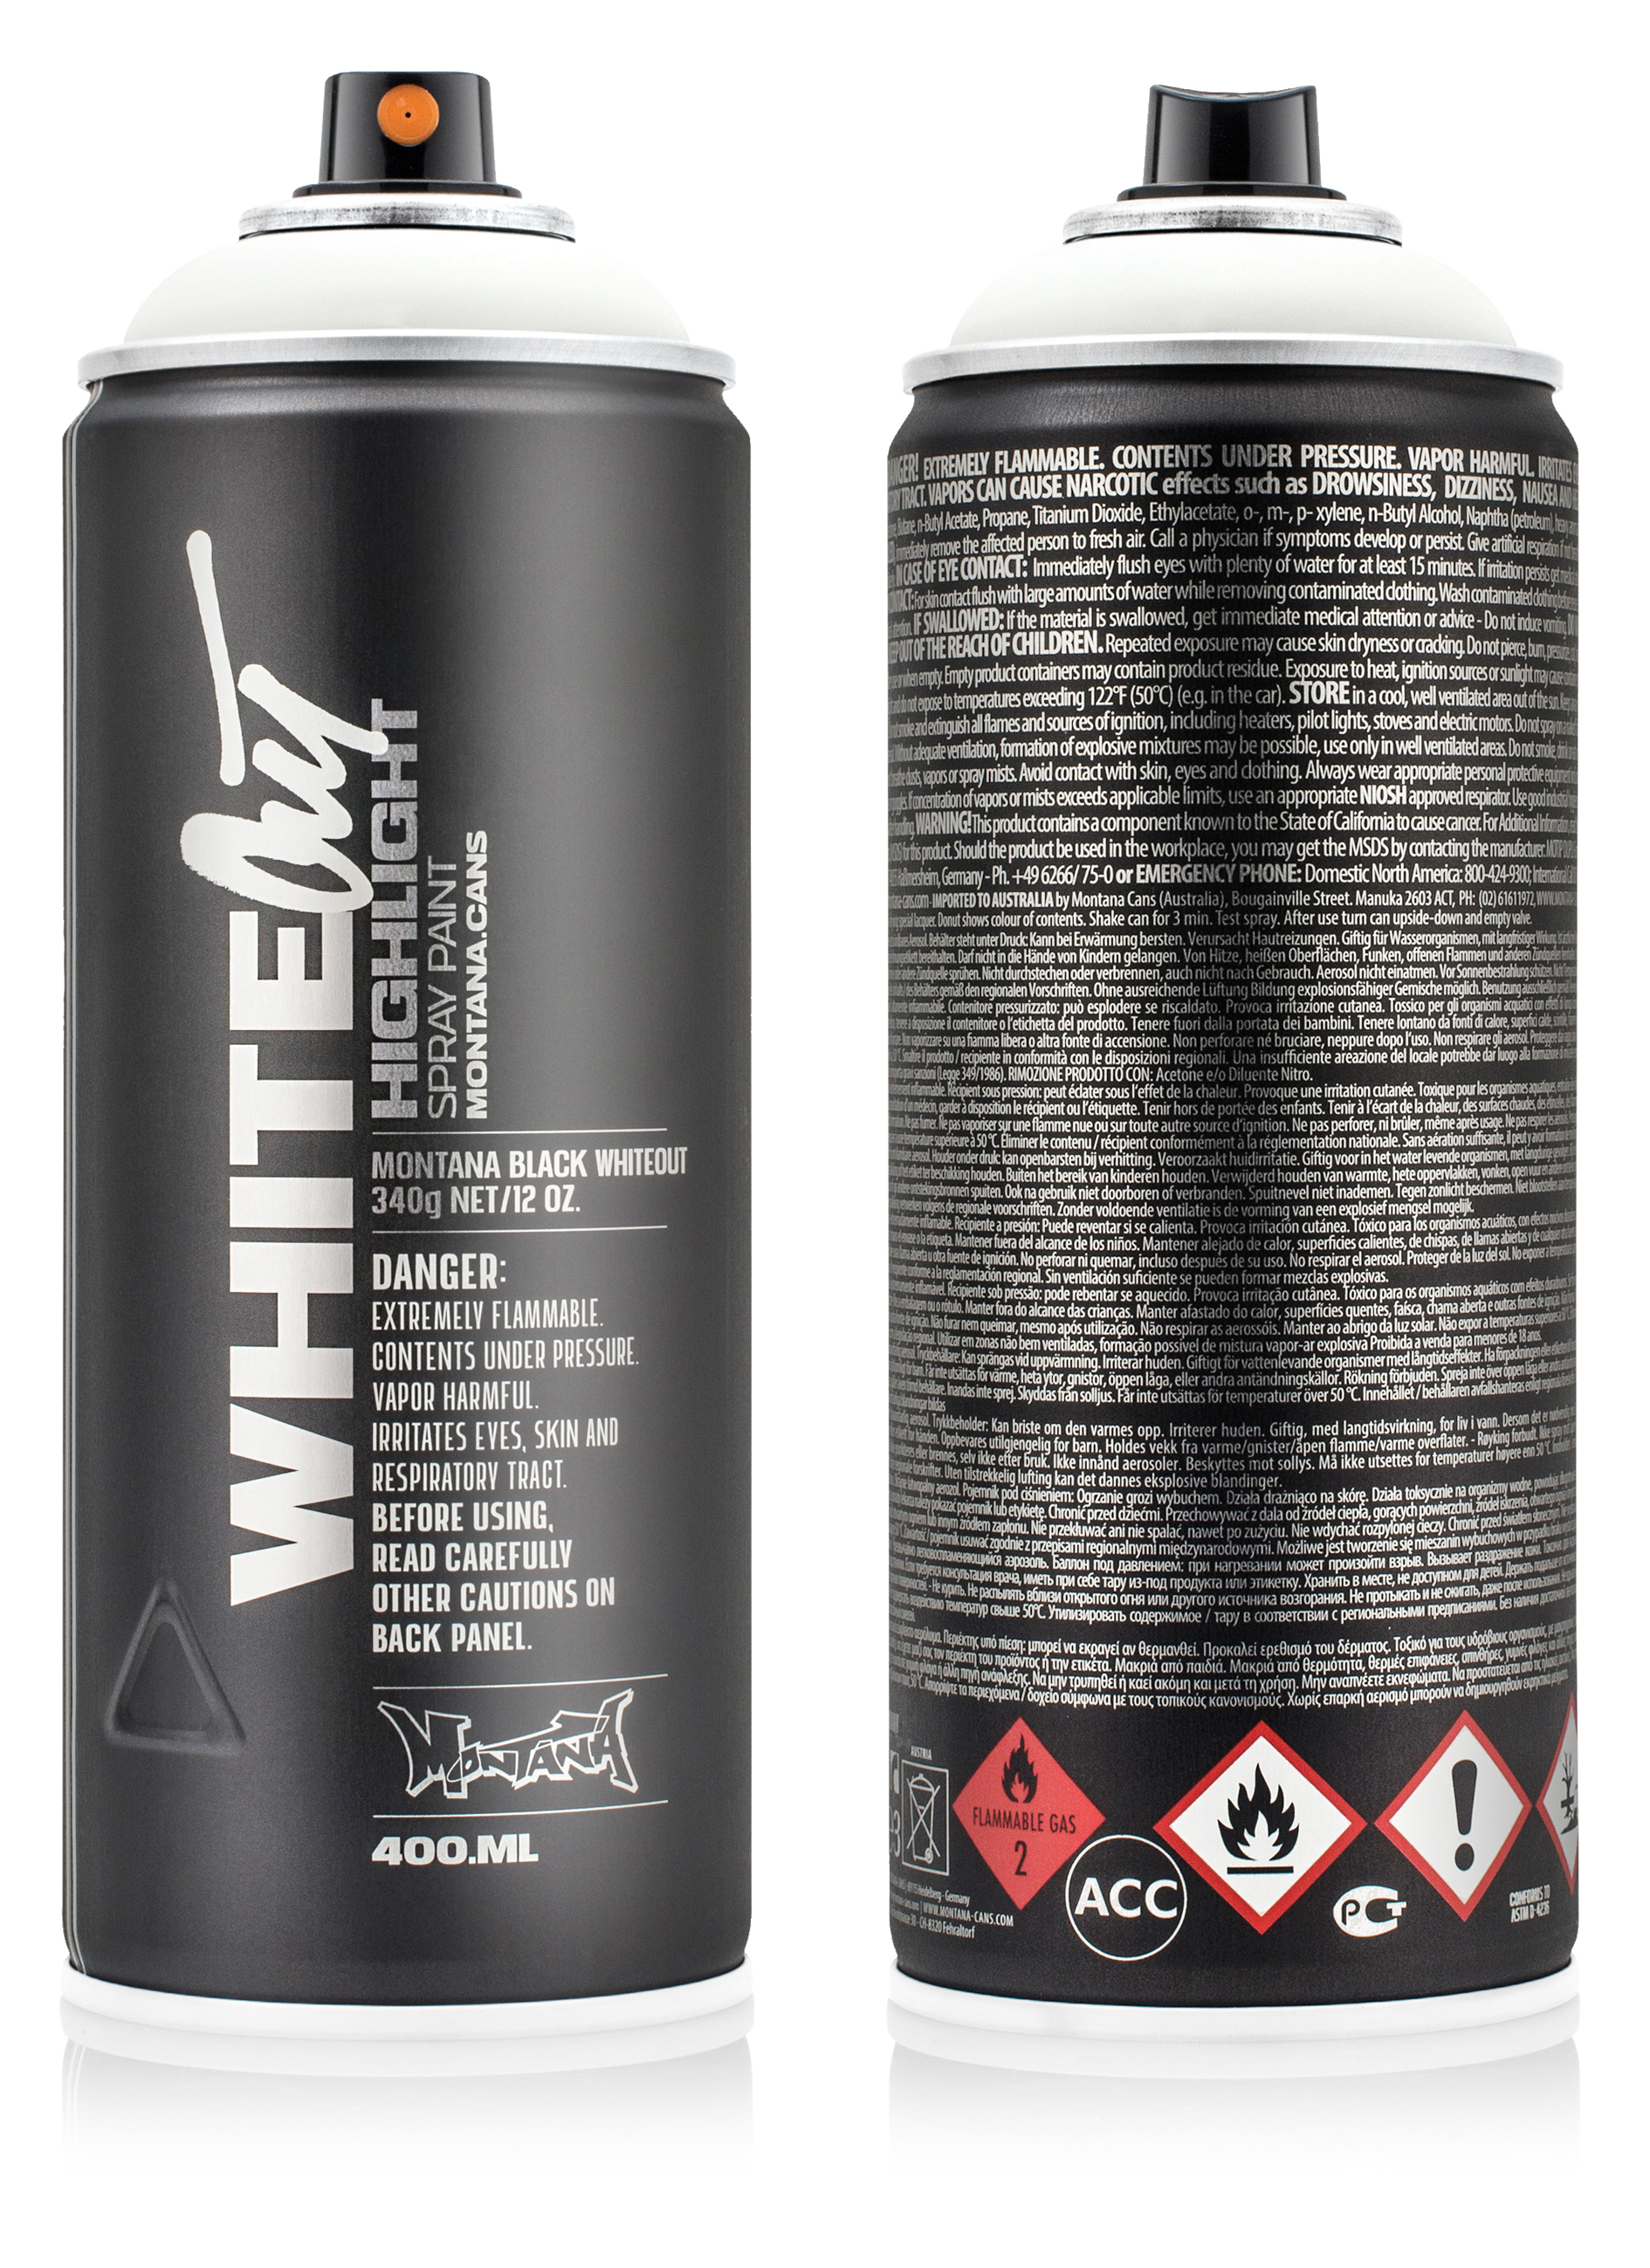  Montana Black High-Pressure Cans - White 400ml Can : Tools &  Home Improvement